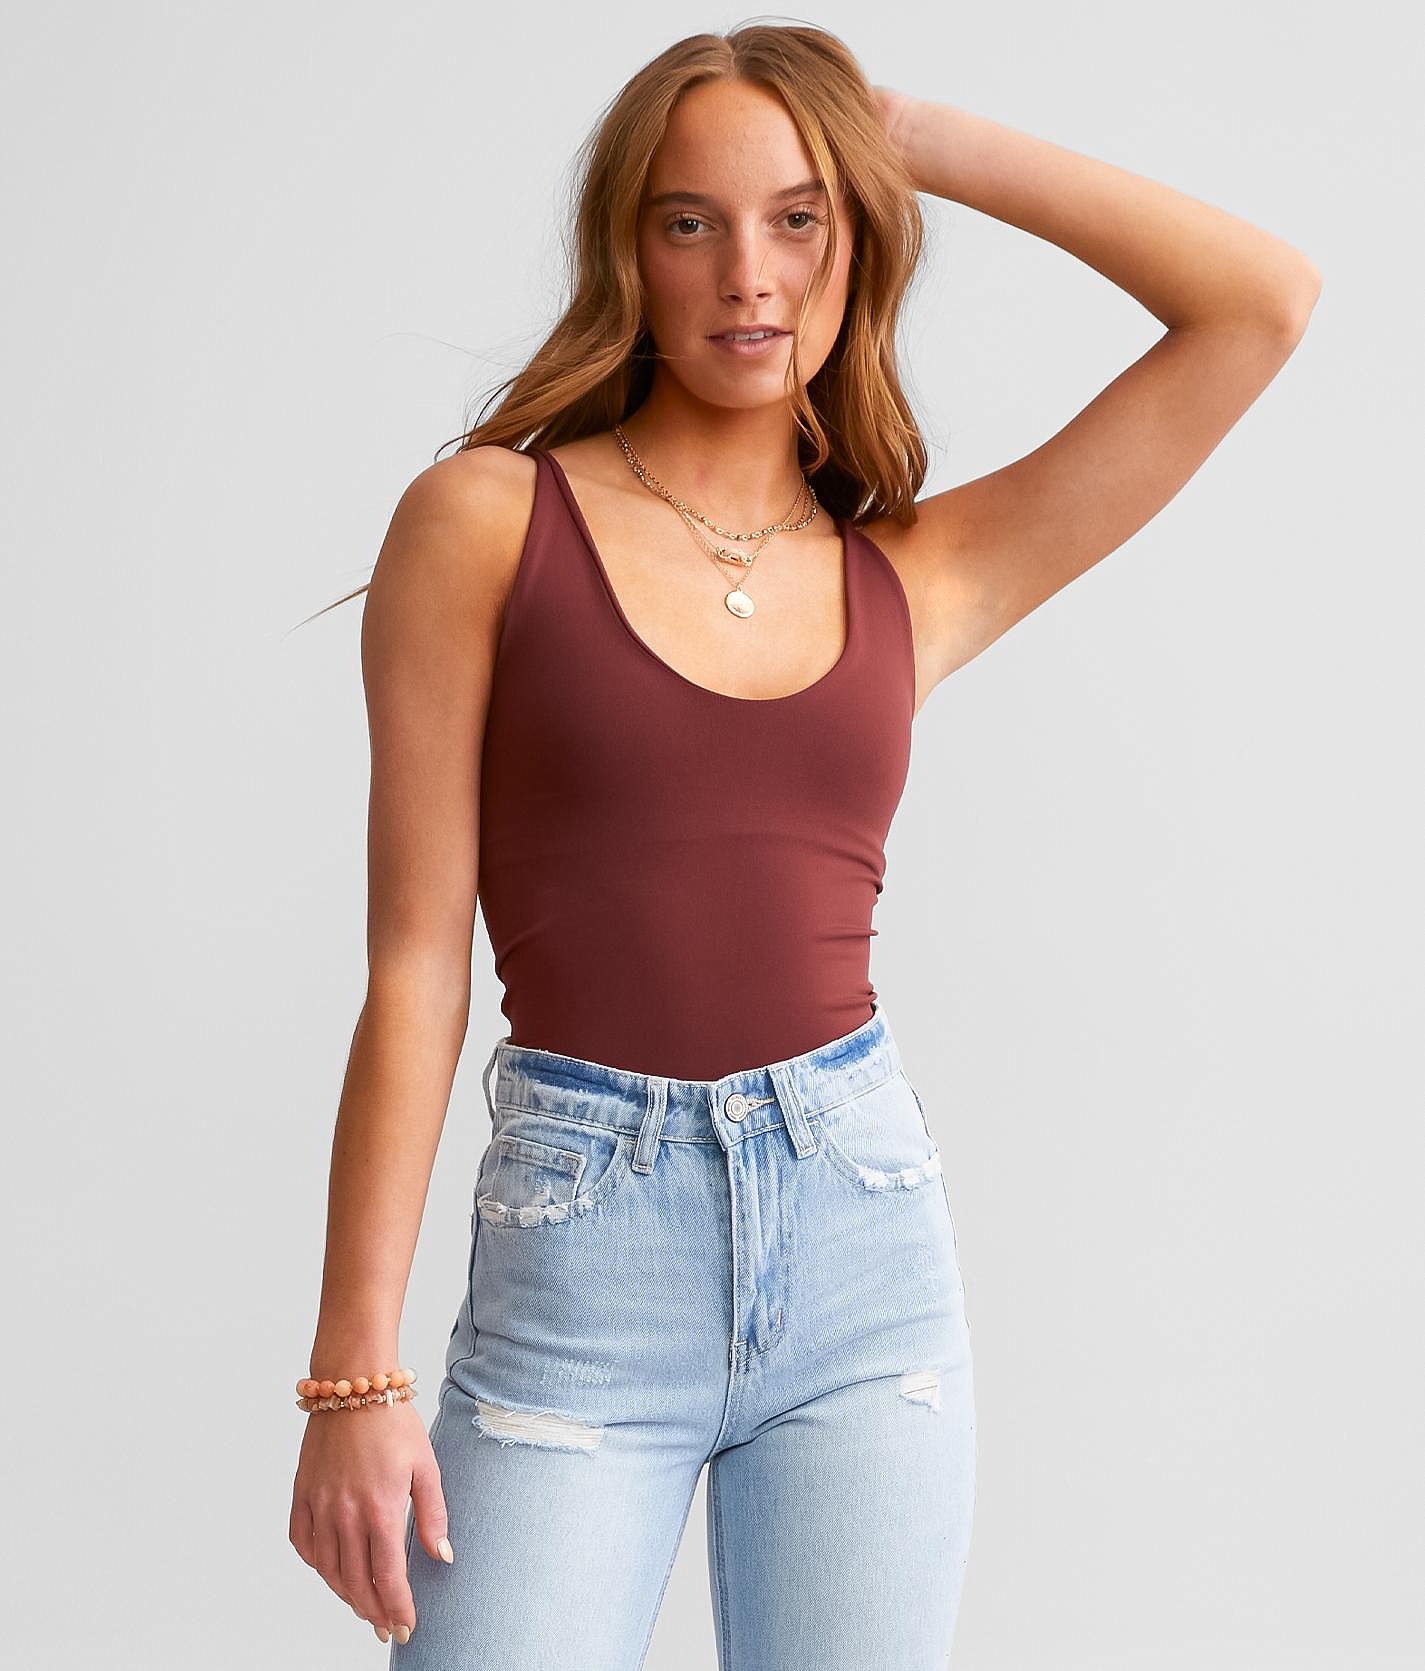 Free People Intimately Cami Tank Top - Women's Bandeaus/Bralettes in Garnet  Grotto